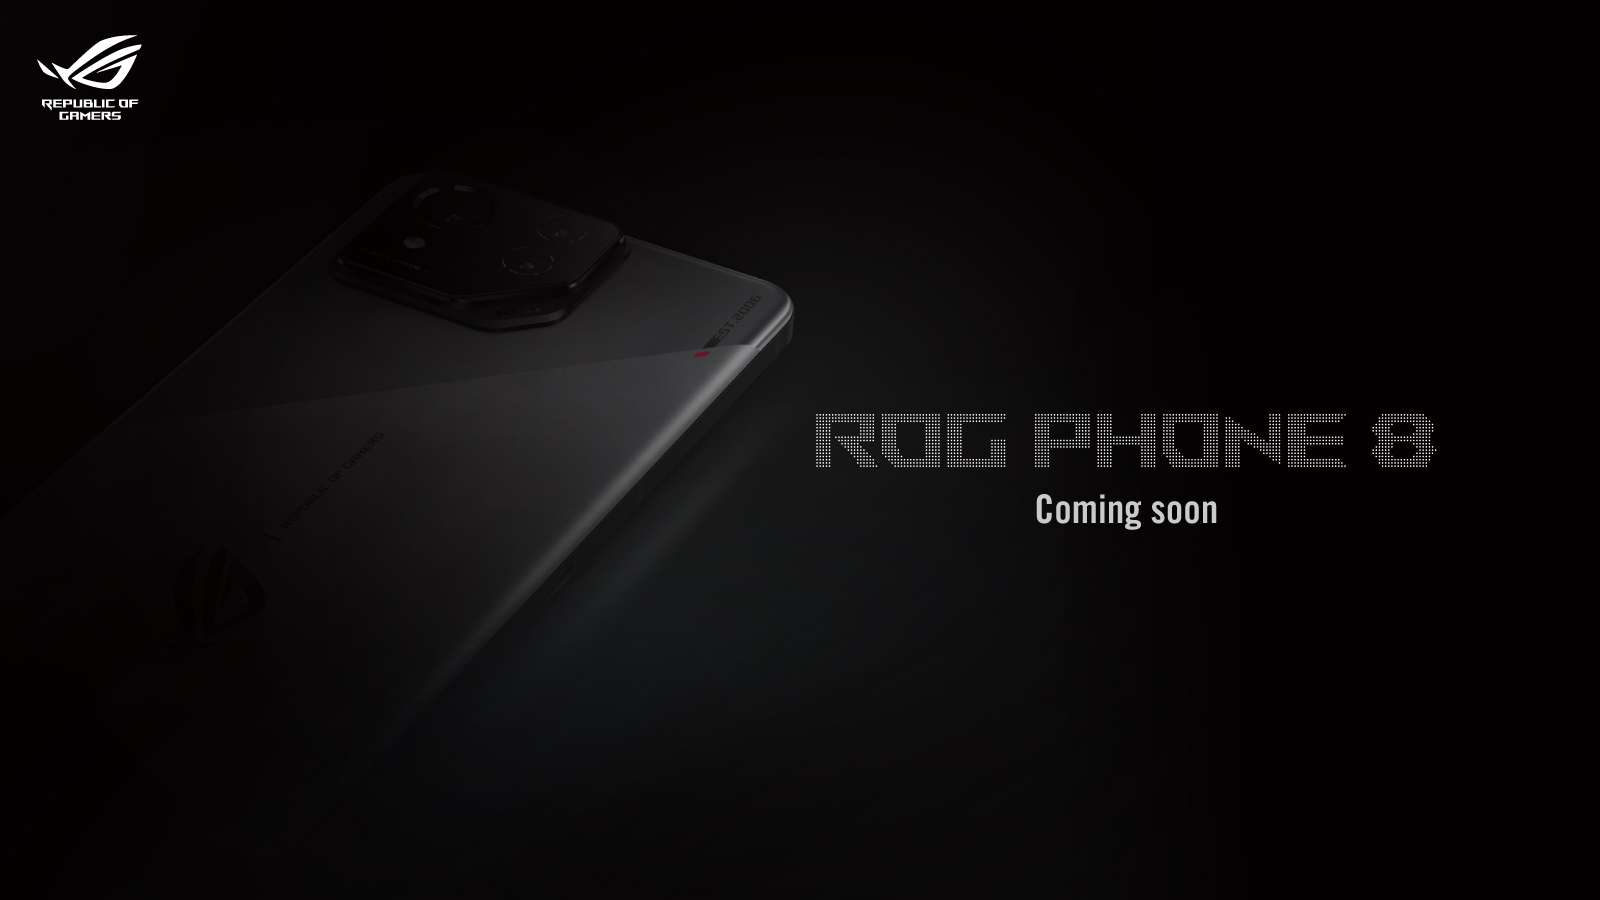 It's official: The ASUS ROG Phone 8 is coming soon - Android Authority